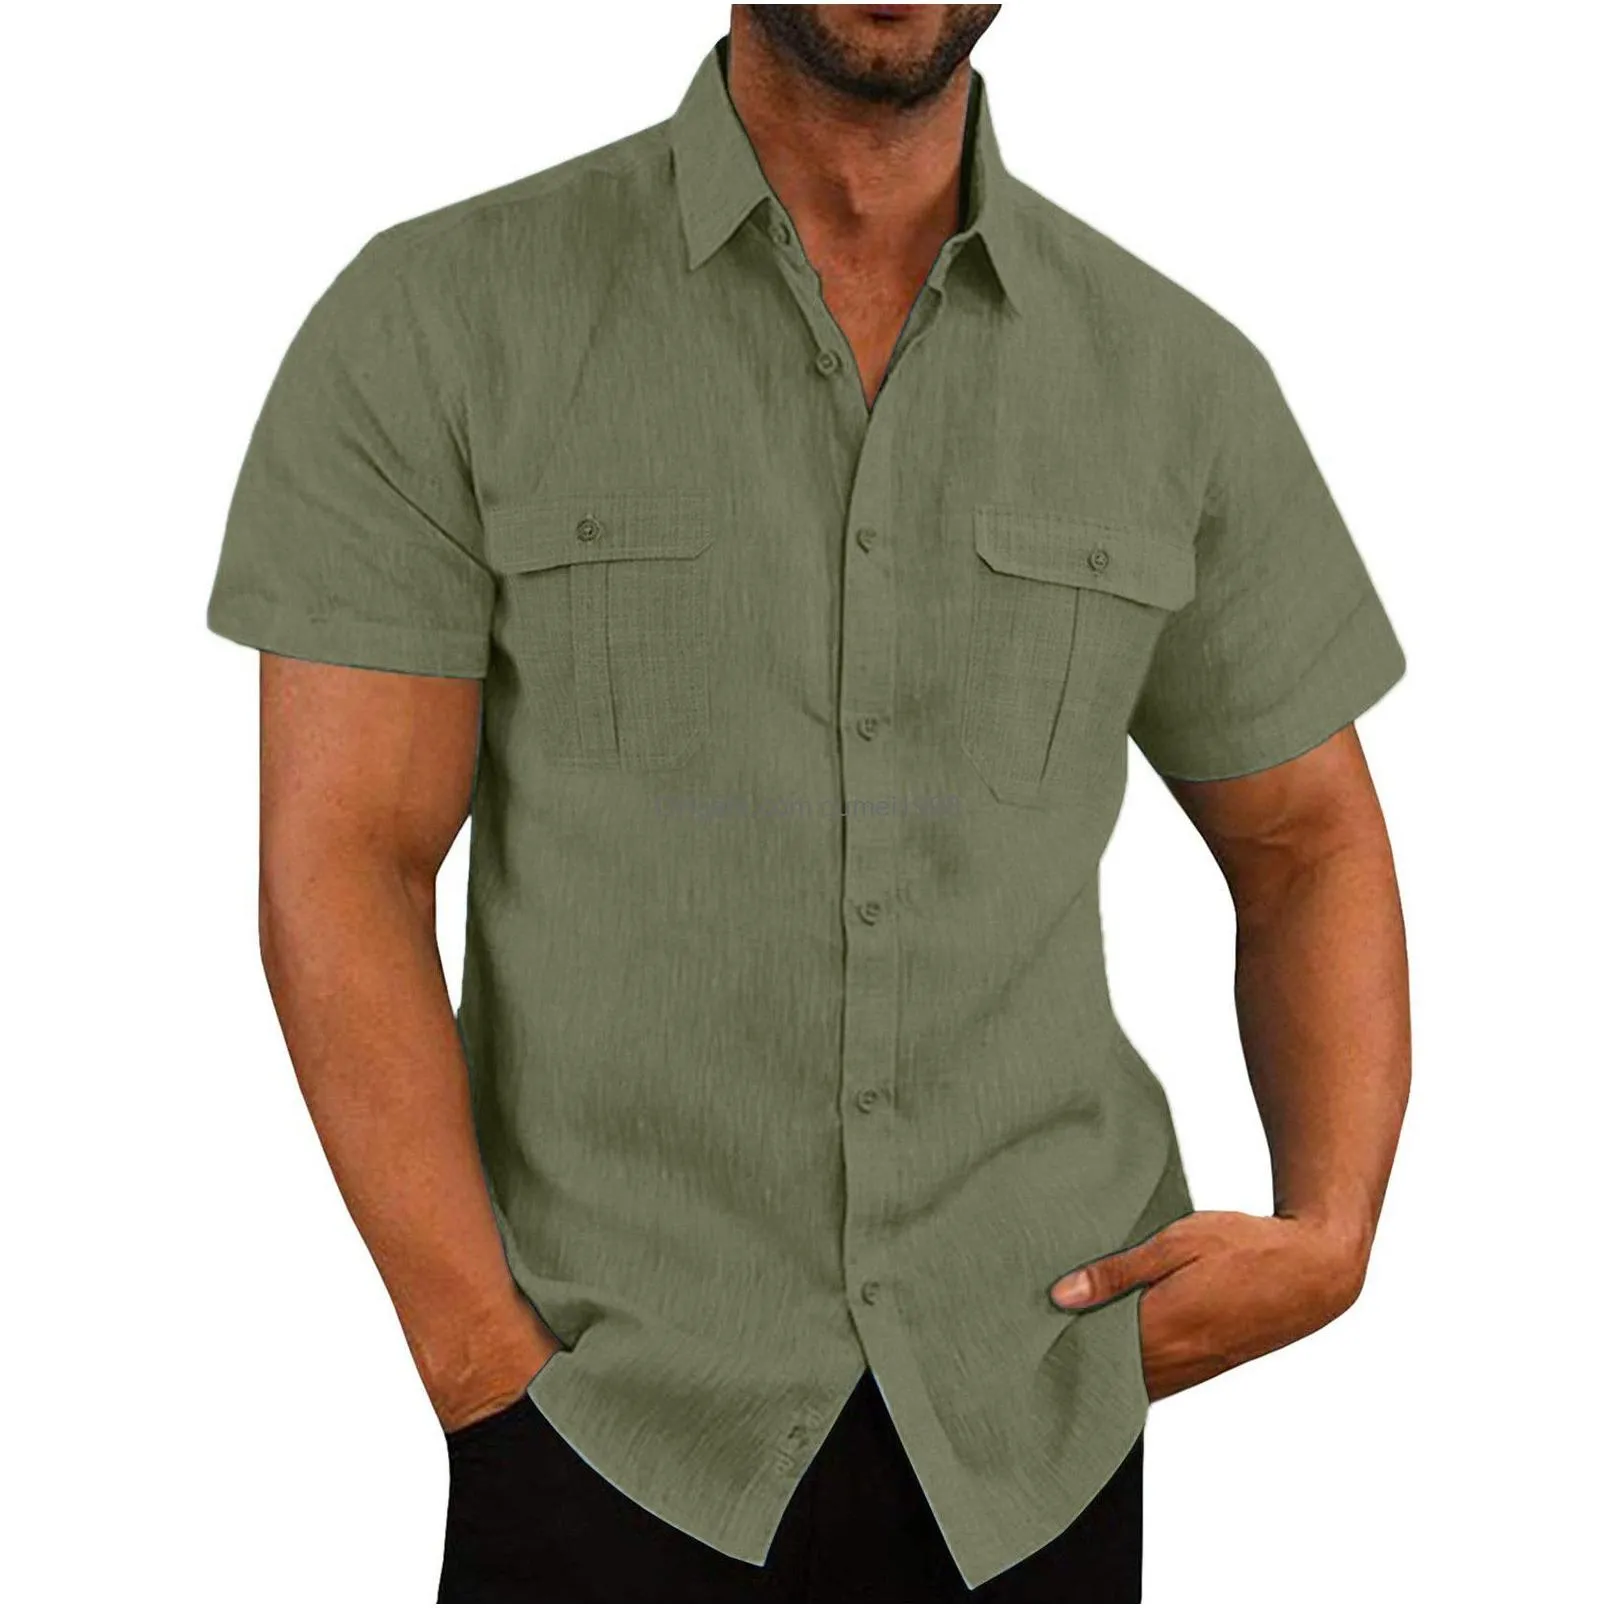 Men`S Casual Shirts Brand New Cott Linen Mensshort-Sleeved Summer Solid Color Turn-Down Collar T-Shirt Shirt Male Breathable 12Uq Dro Dhho8